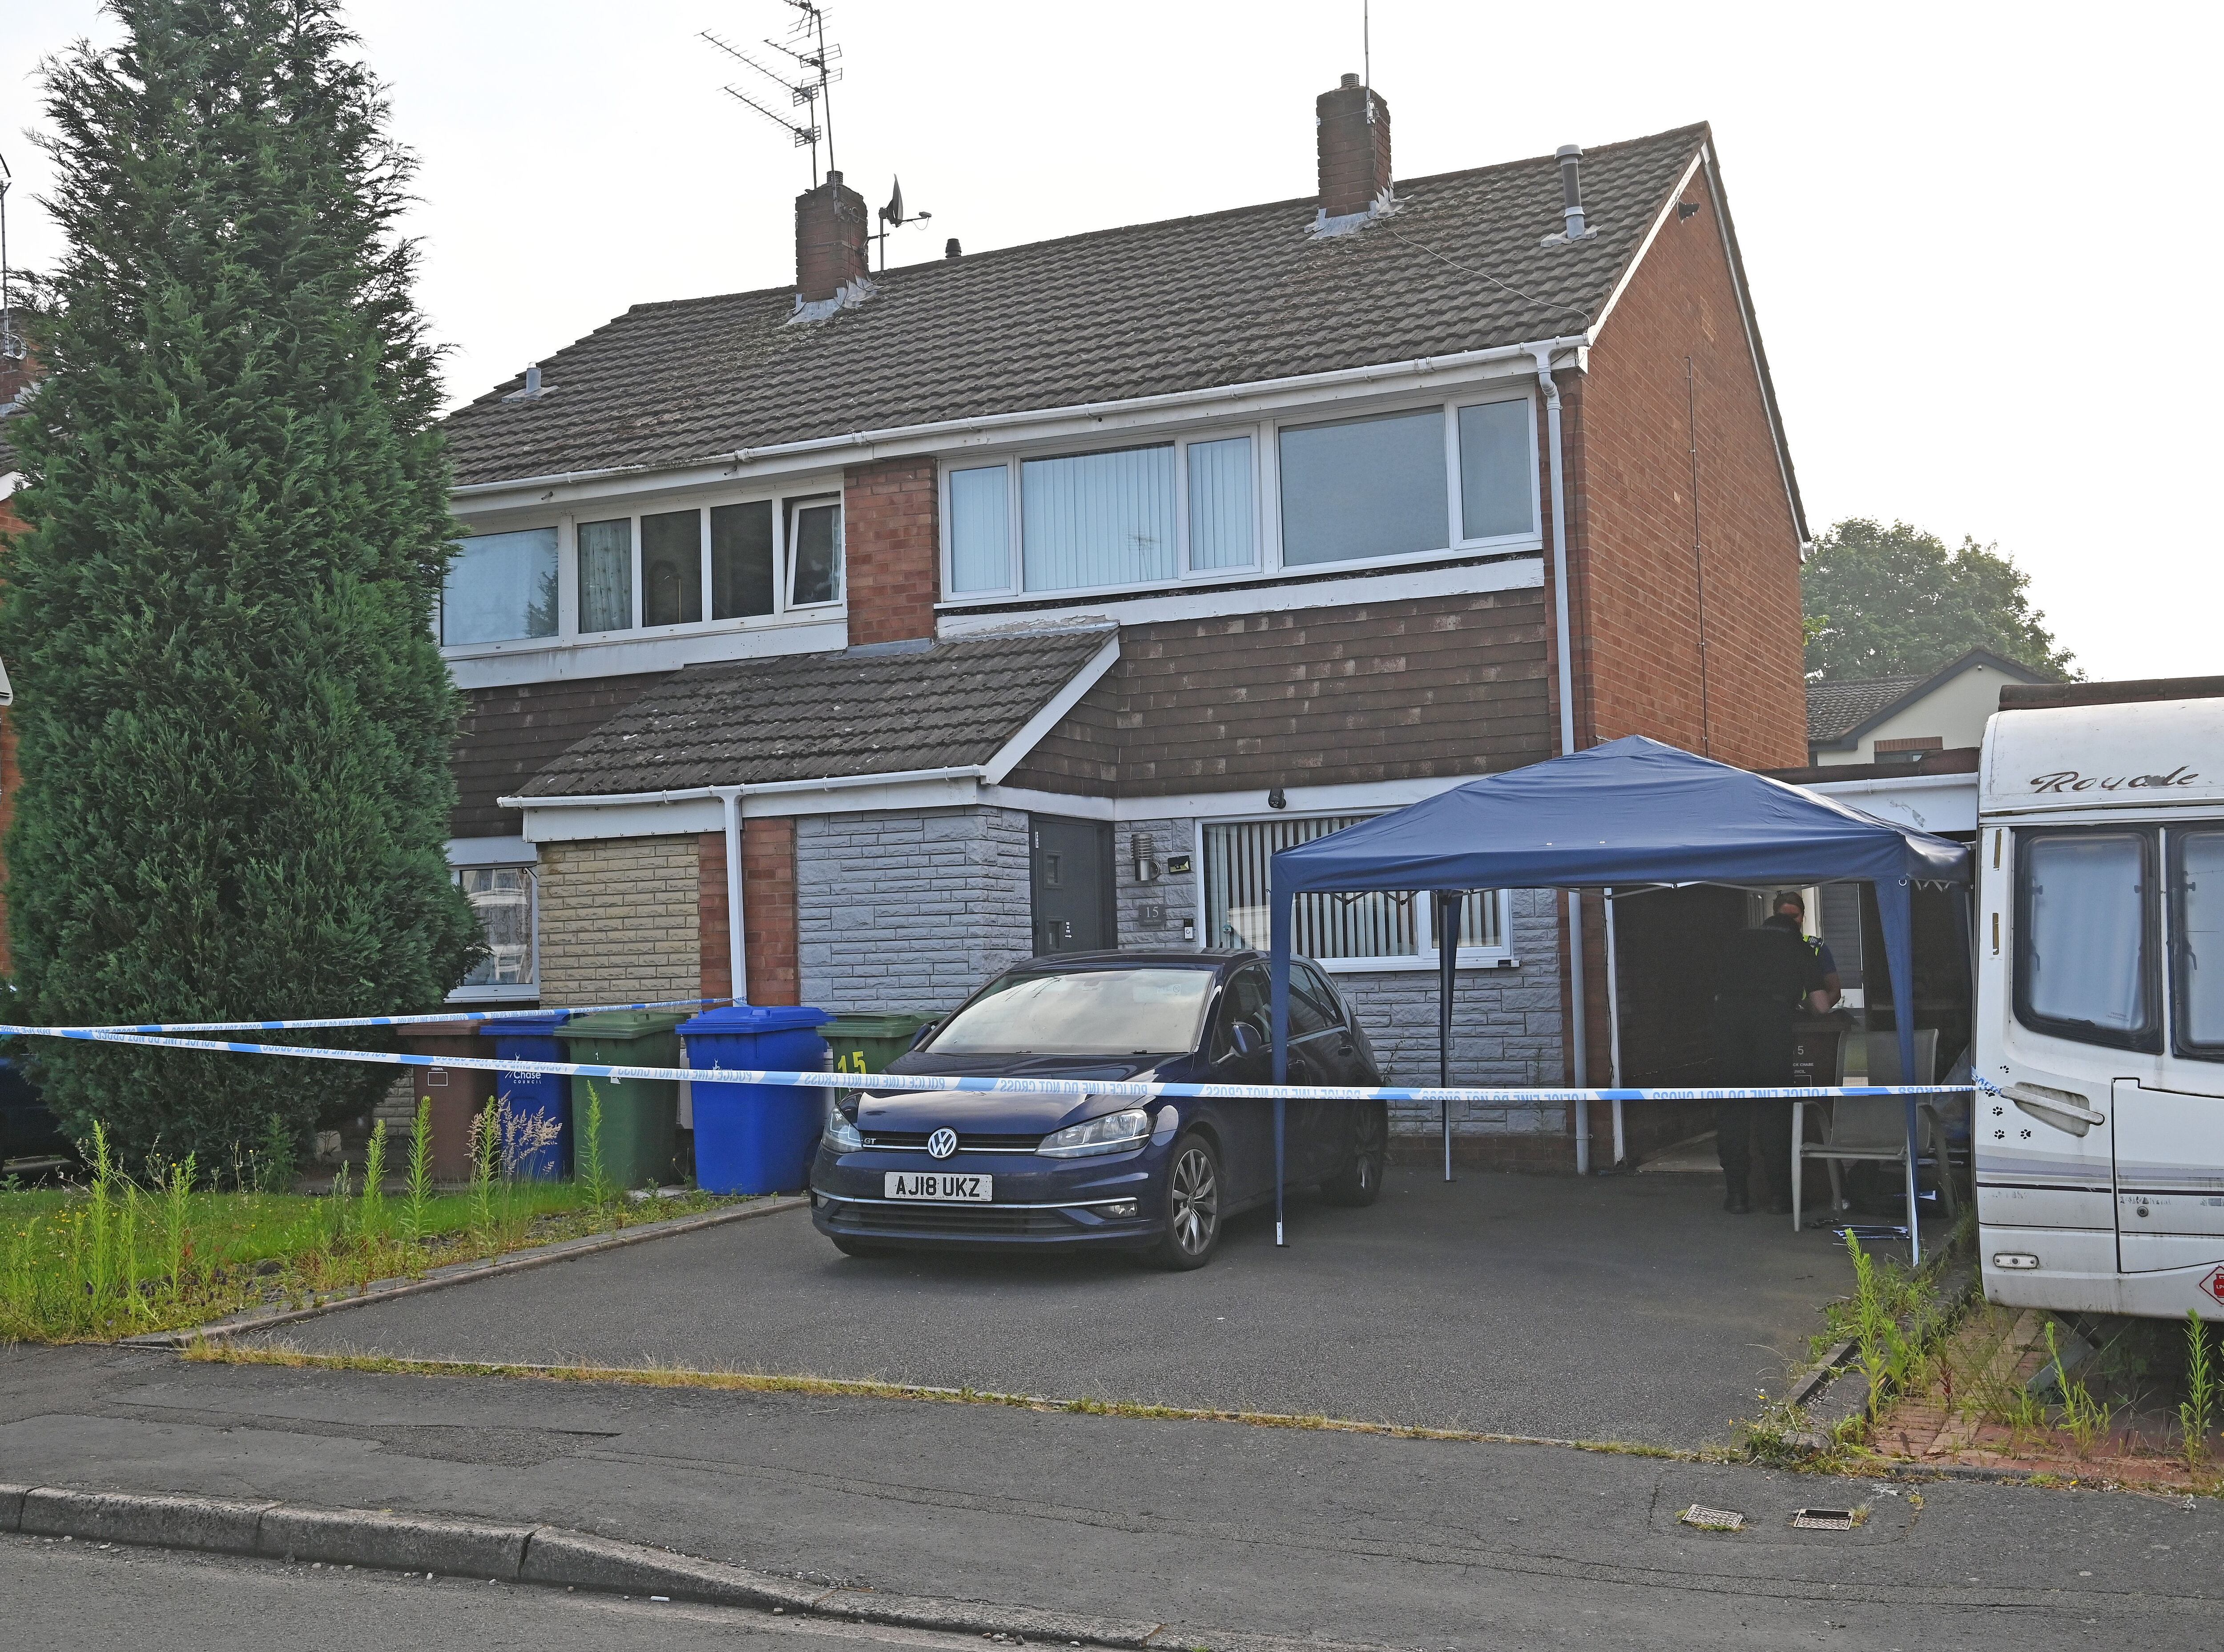 Murder investigation continues into deaths of two people at house